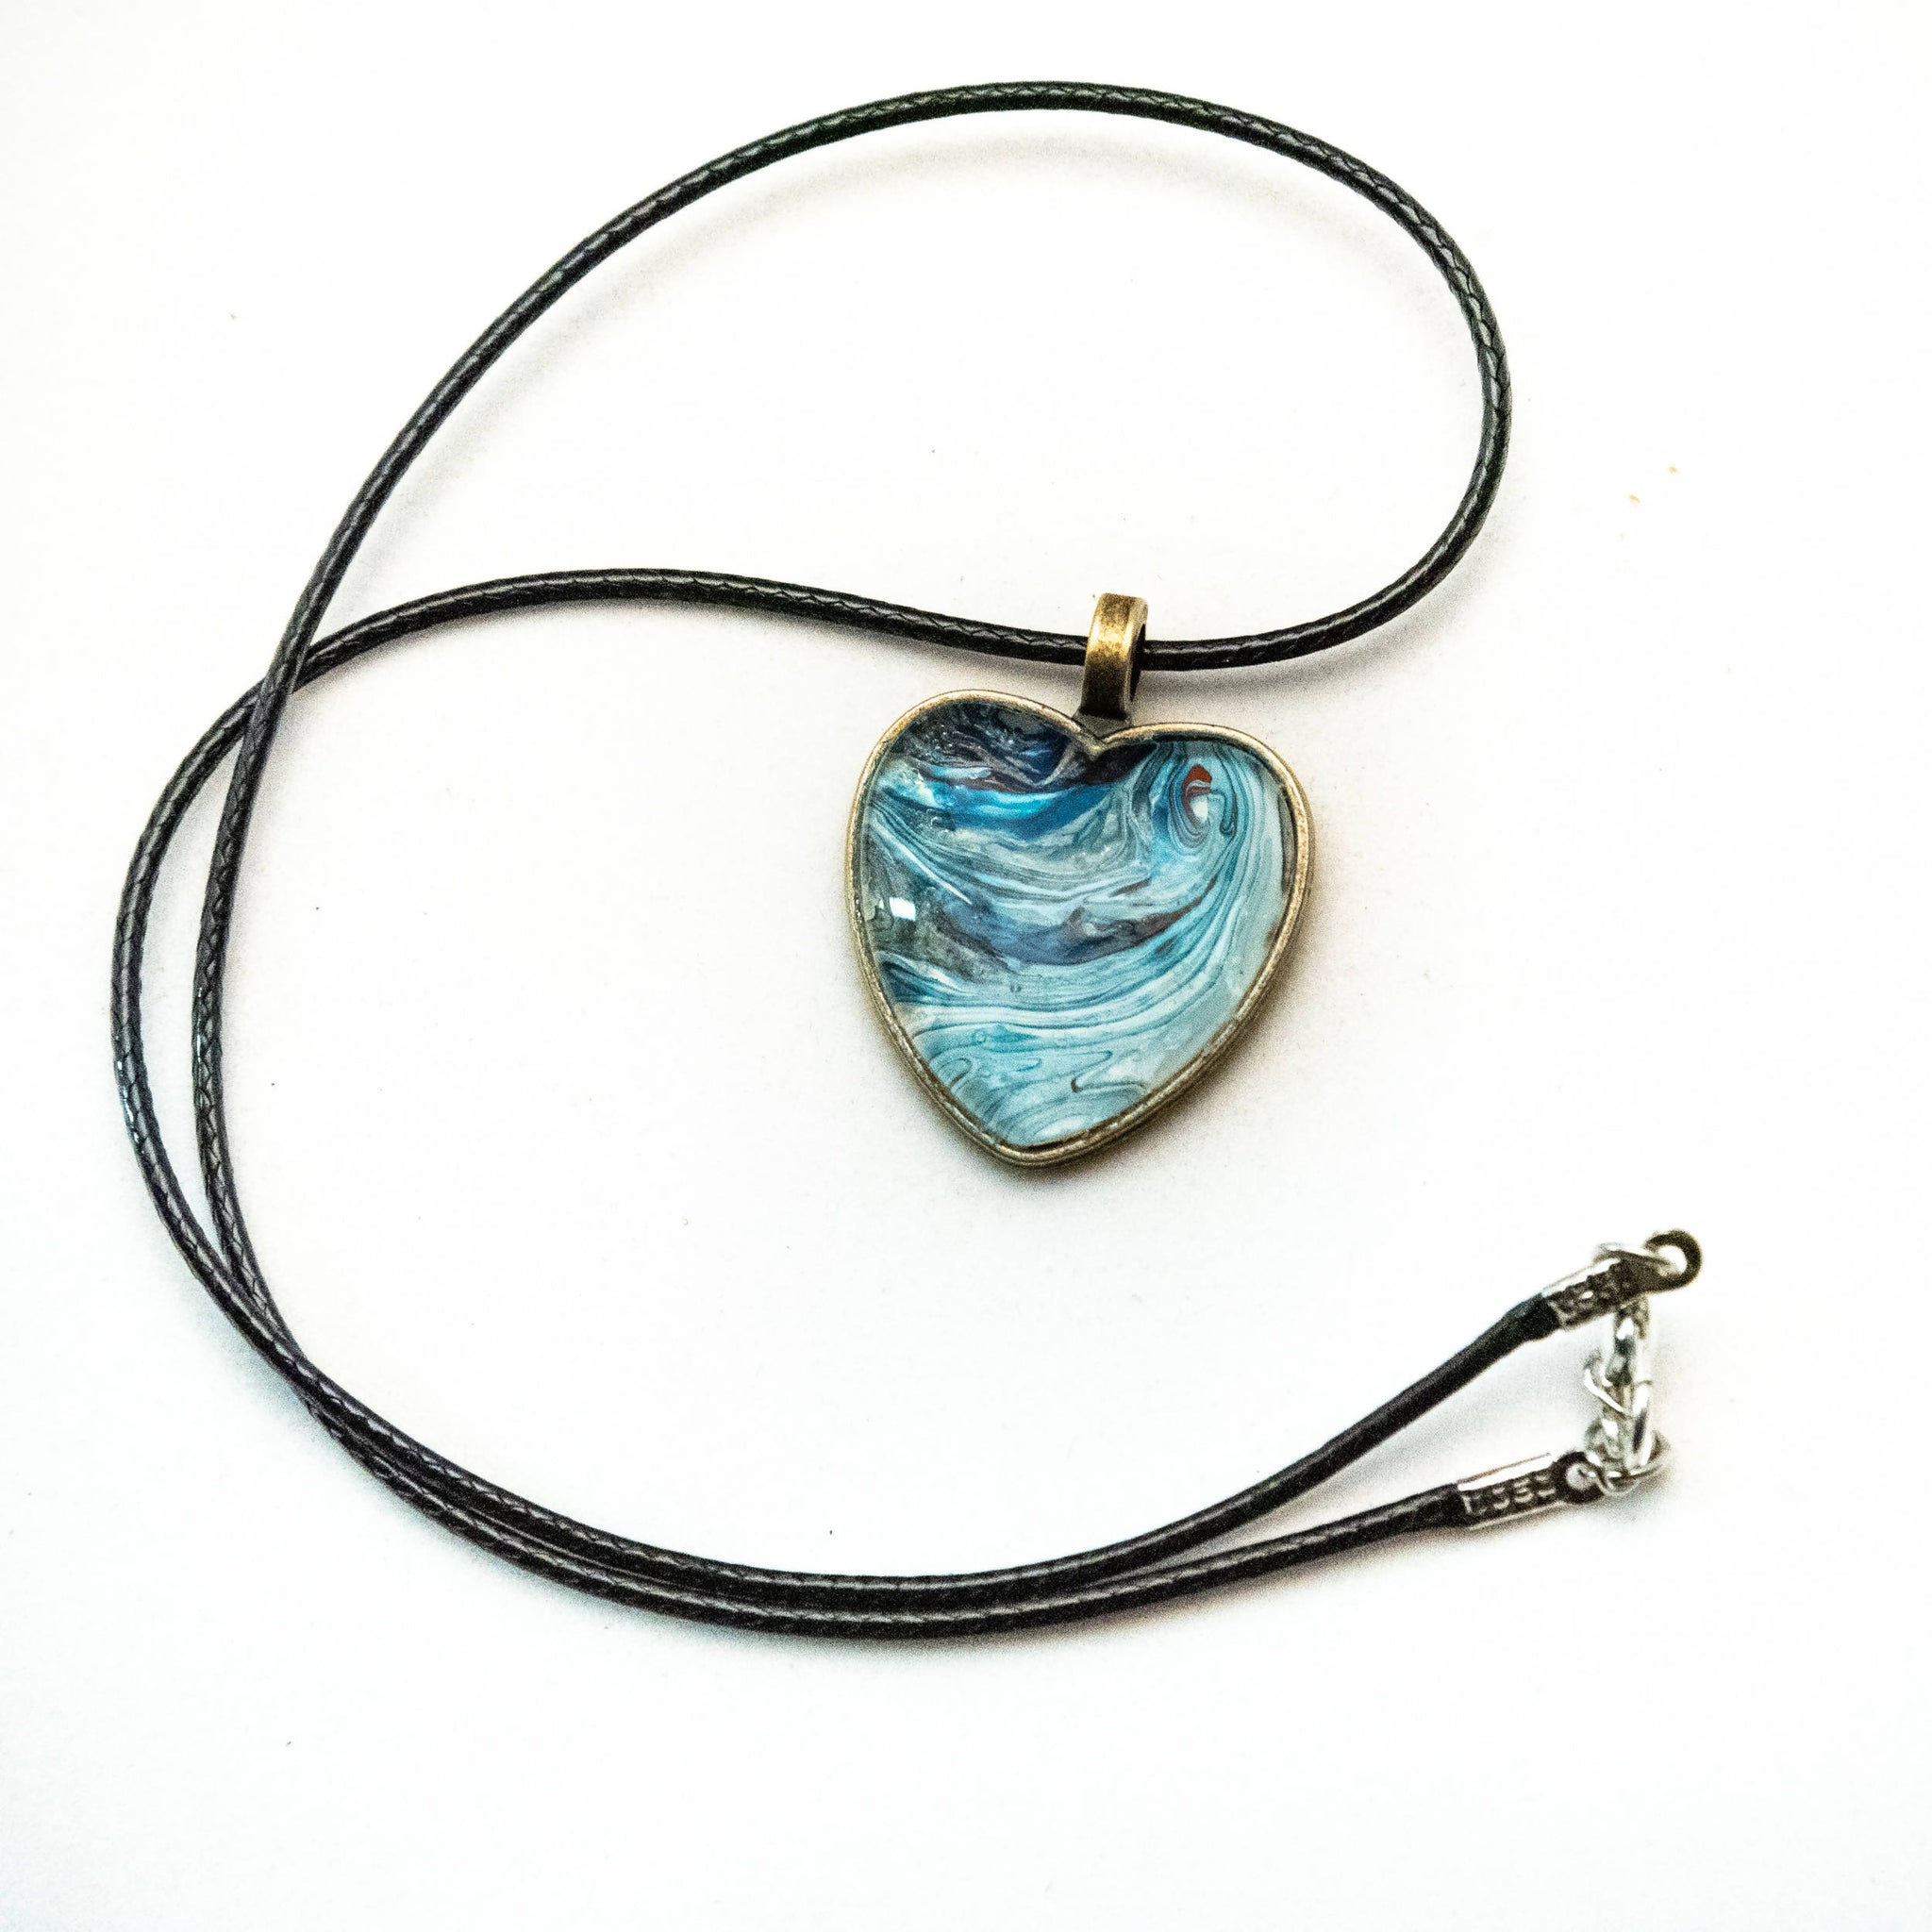 Heart Shaped Painted Pendant with Cord